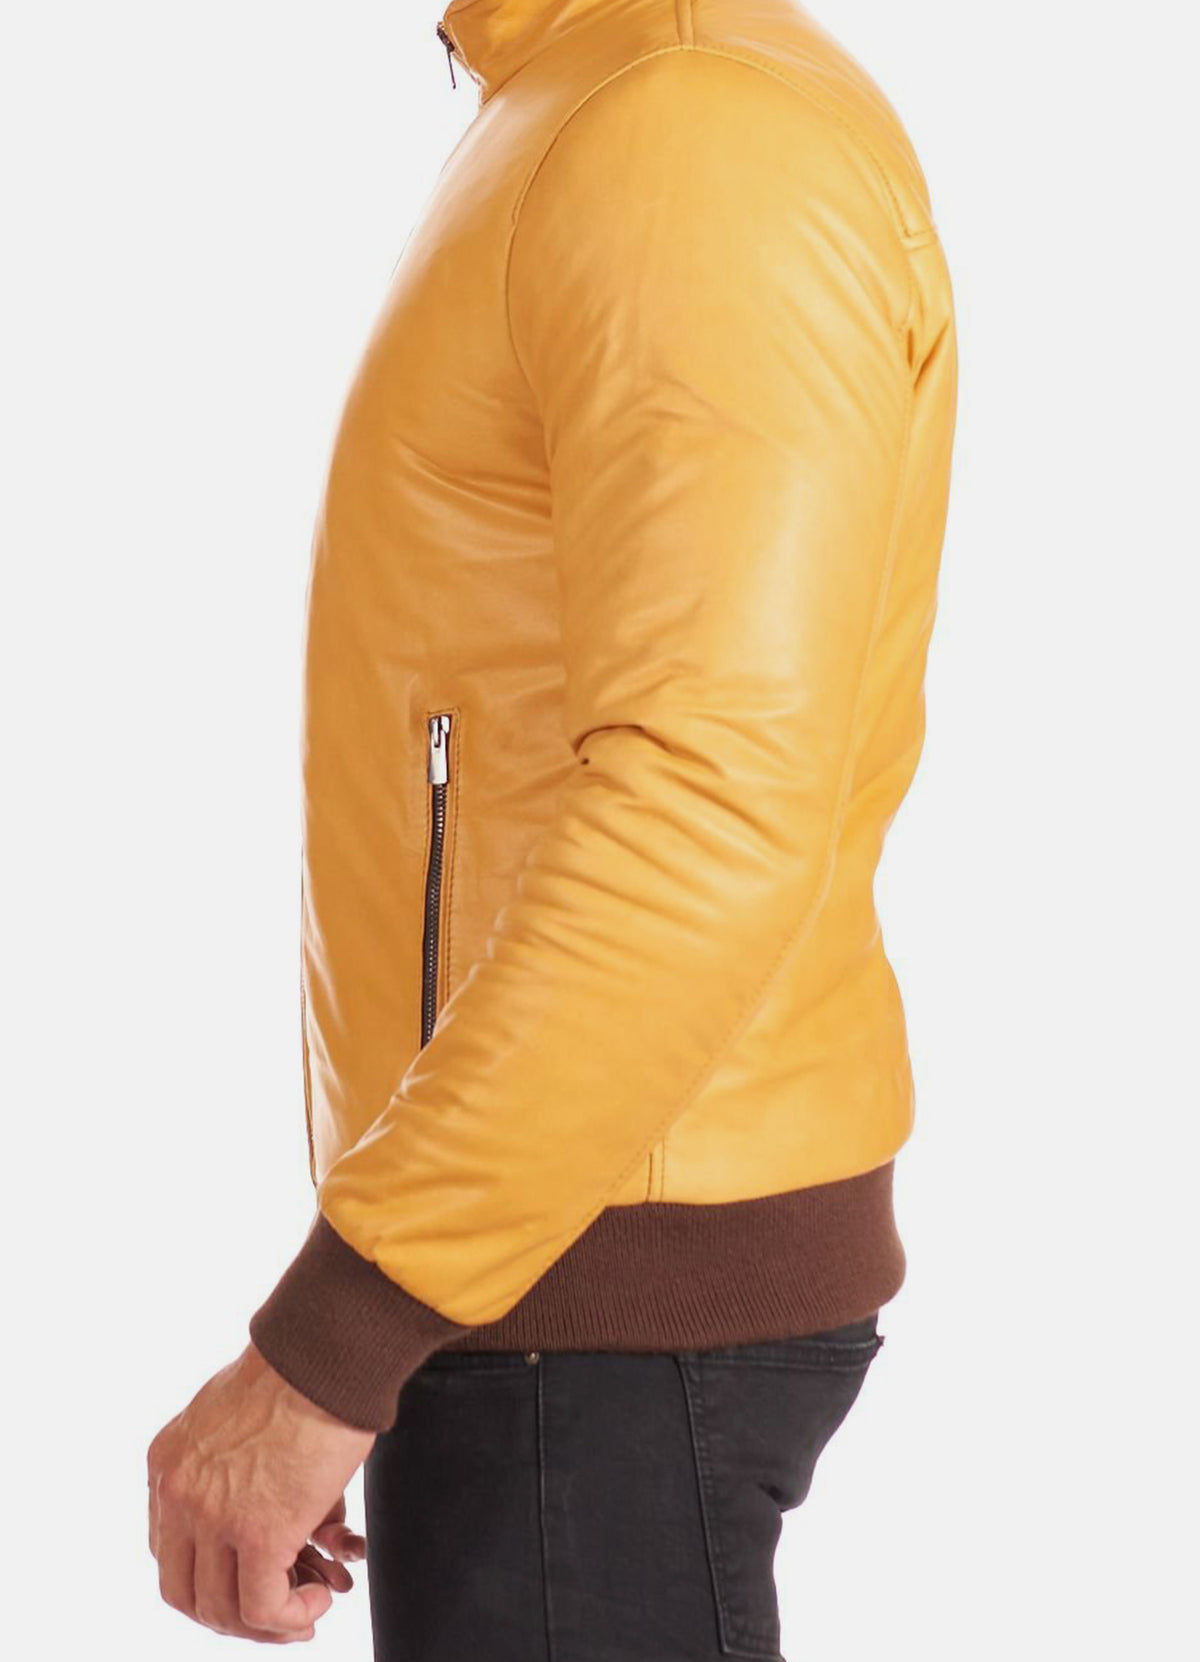 Mens Soft Yellow Bomber Leather Jacket | Elite Collection